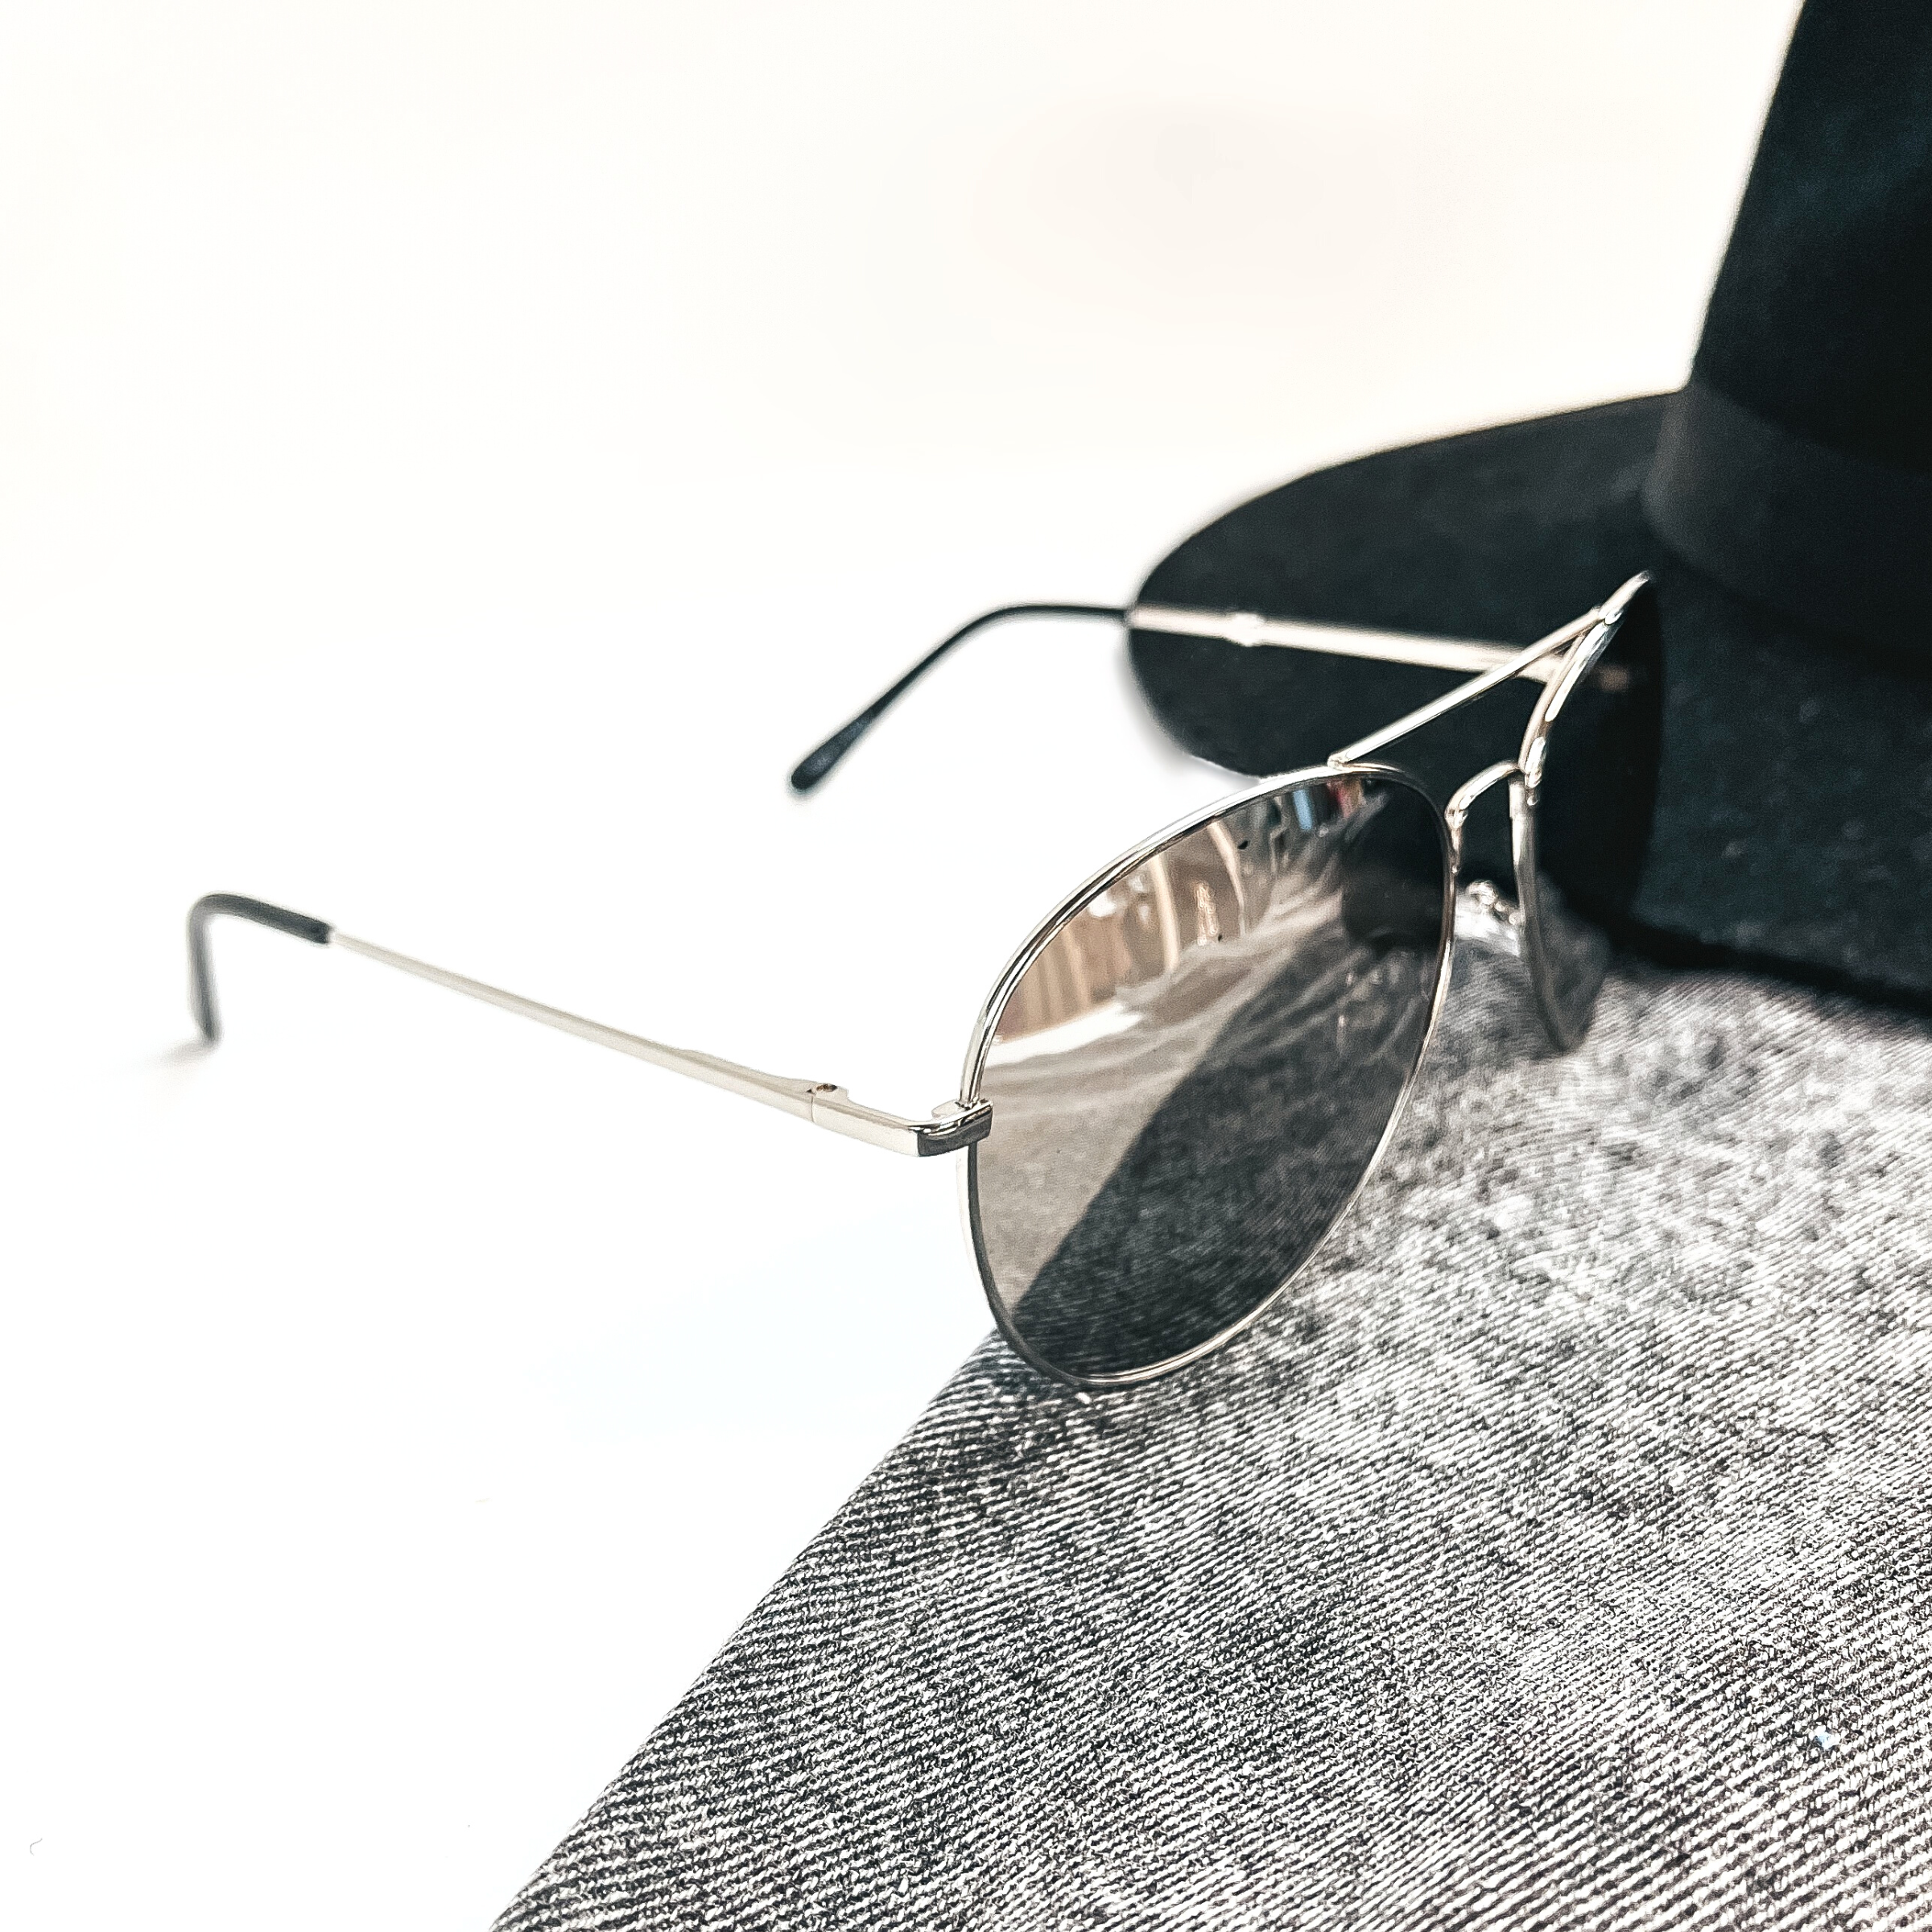 These are silver chrome mirrored sunglasses in an aviator style with silver frame/outline and black ear pieces. These sunglasses are taken on black/dark grey denim and a white background. There is a black felt hat in the back as decor.